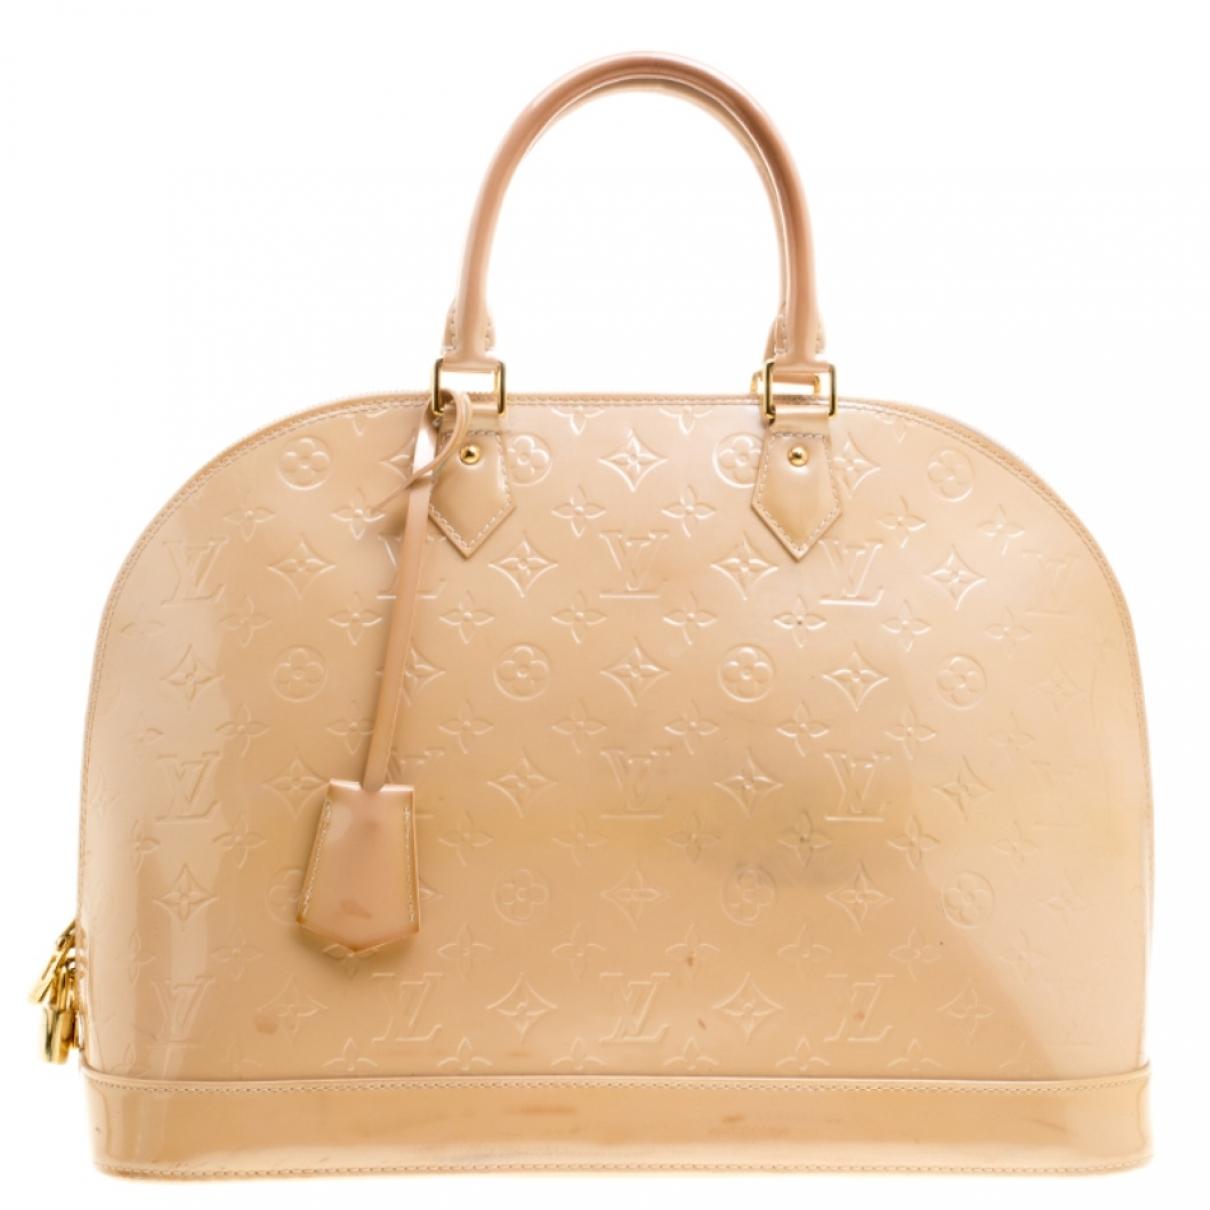 Lyst - Louis Vuitton Alma Bb Patent Leather Handbag in Natural